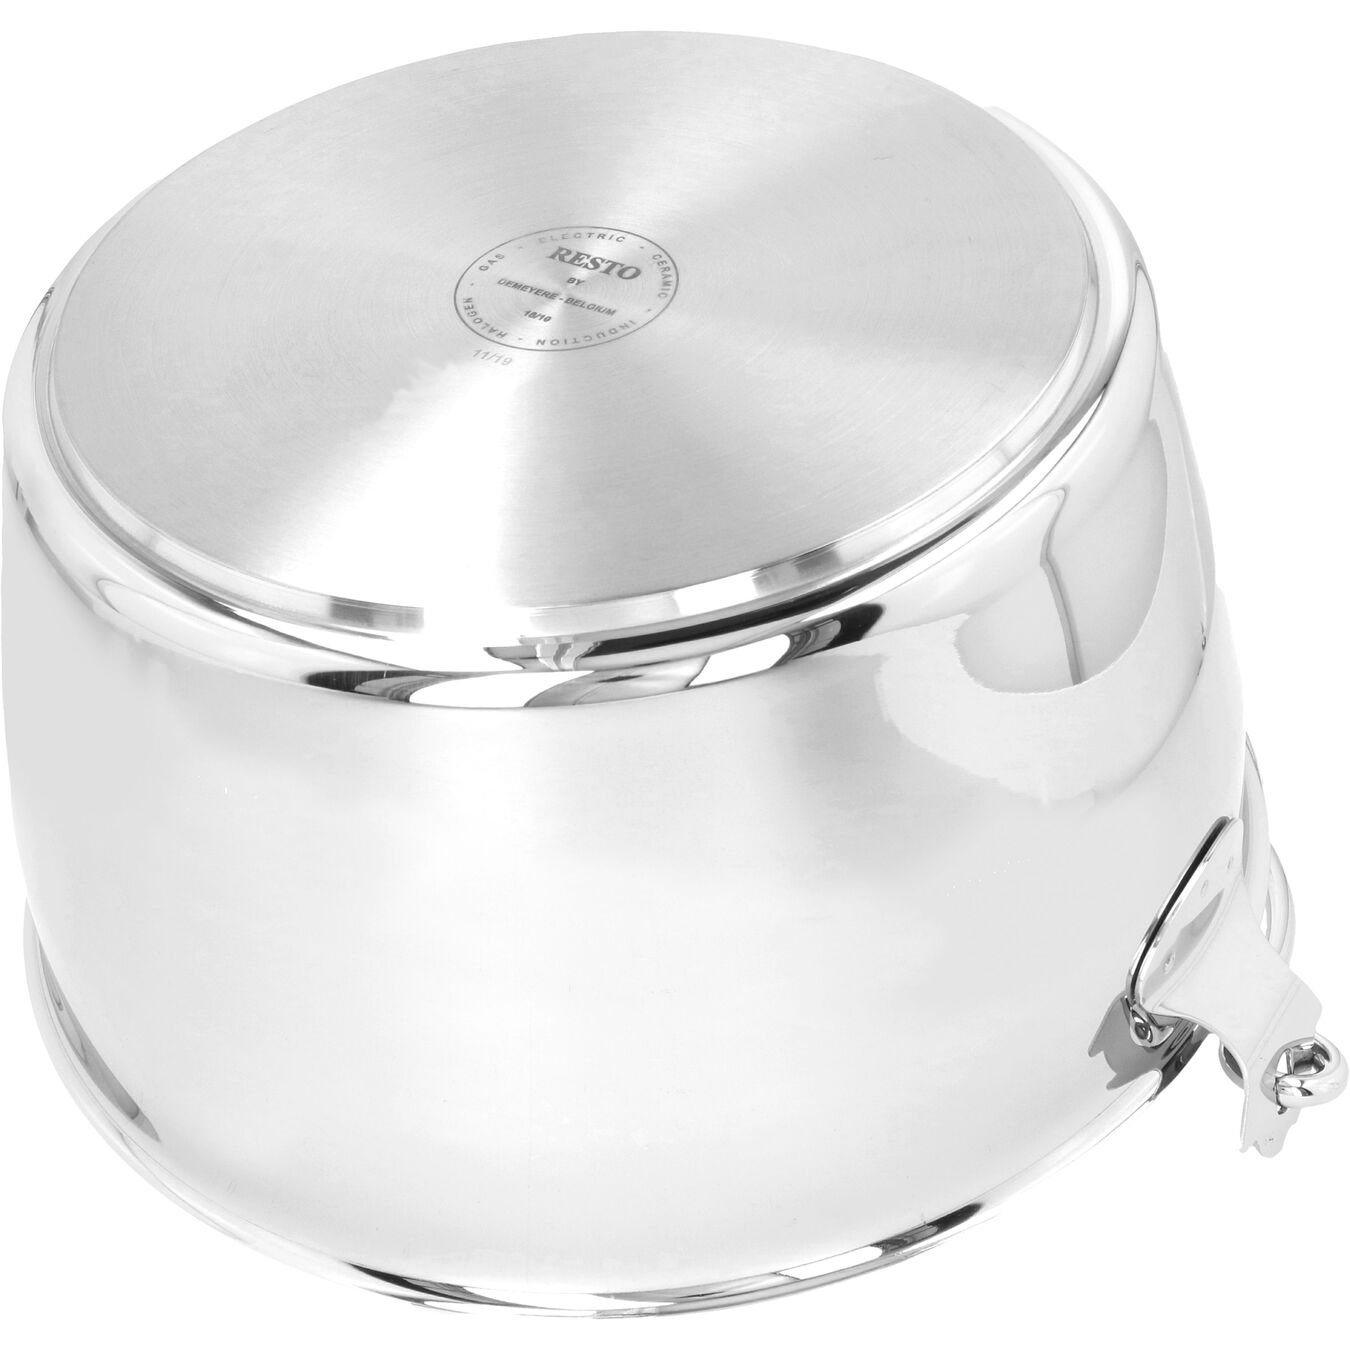 10.6 qt, 18/10 Stainless Steel, Maslin Pan,,large 2